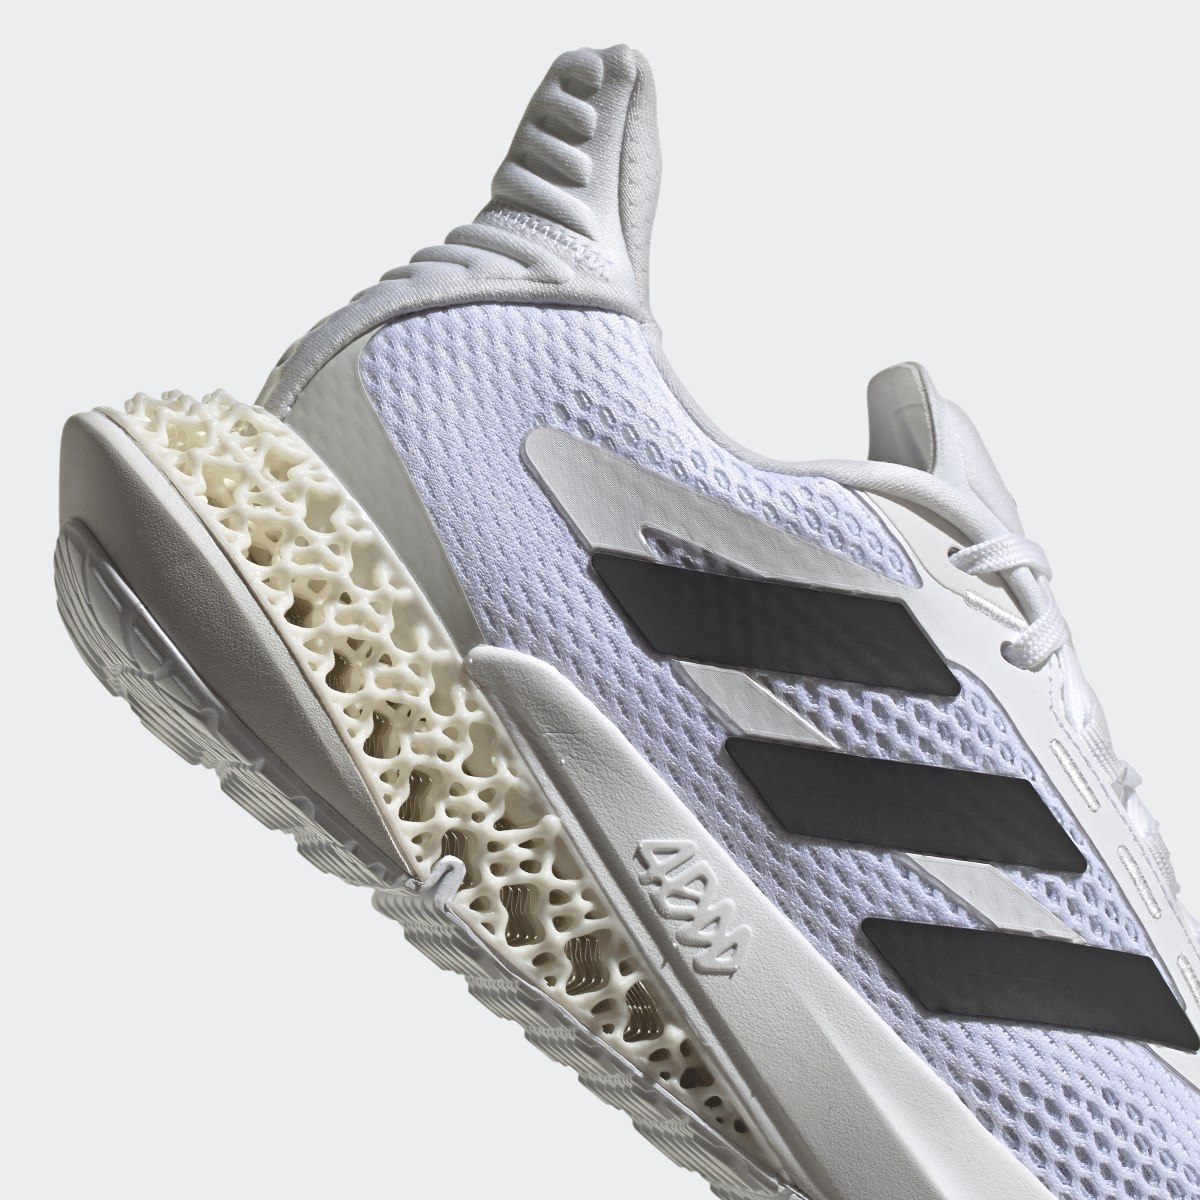 Adidas 4DFWD Pulse Shoes. 9